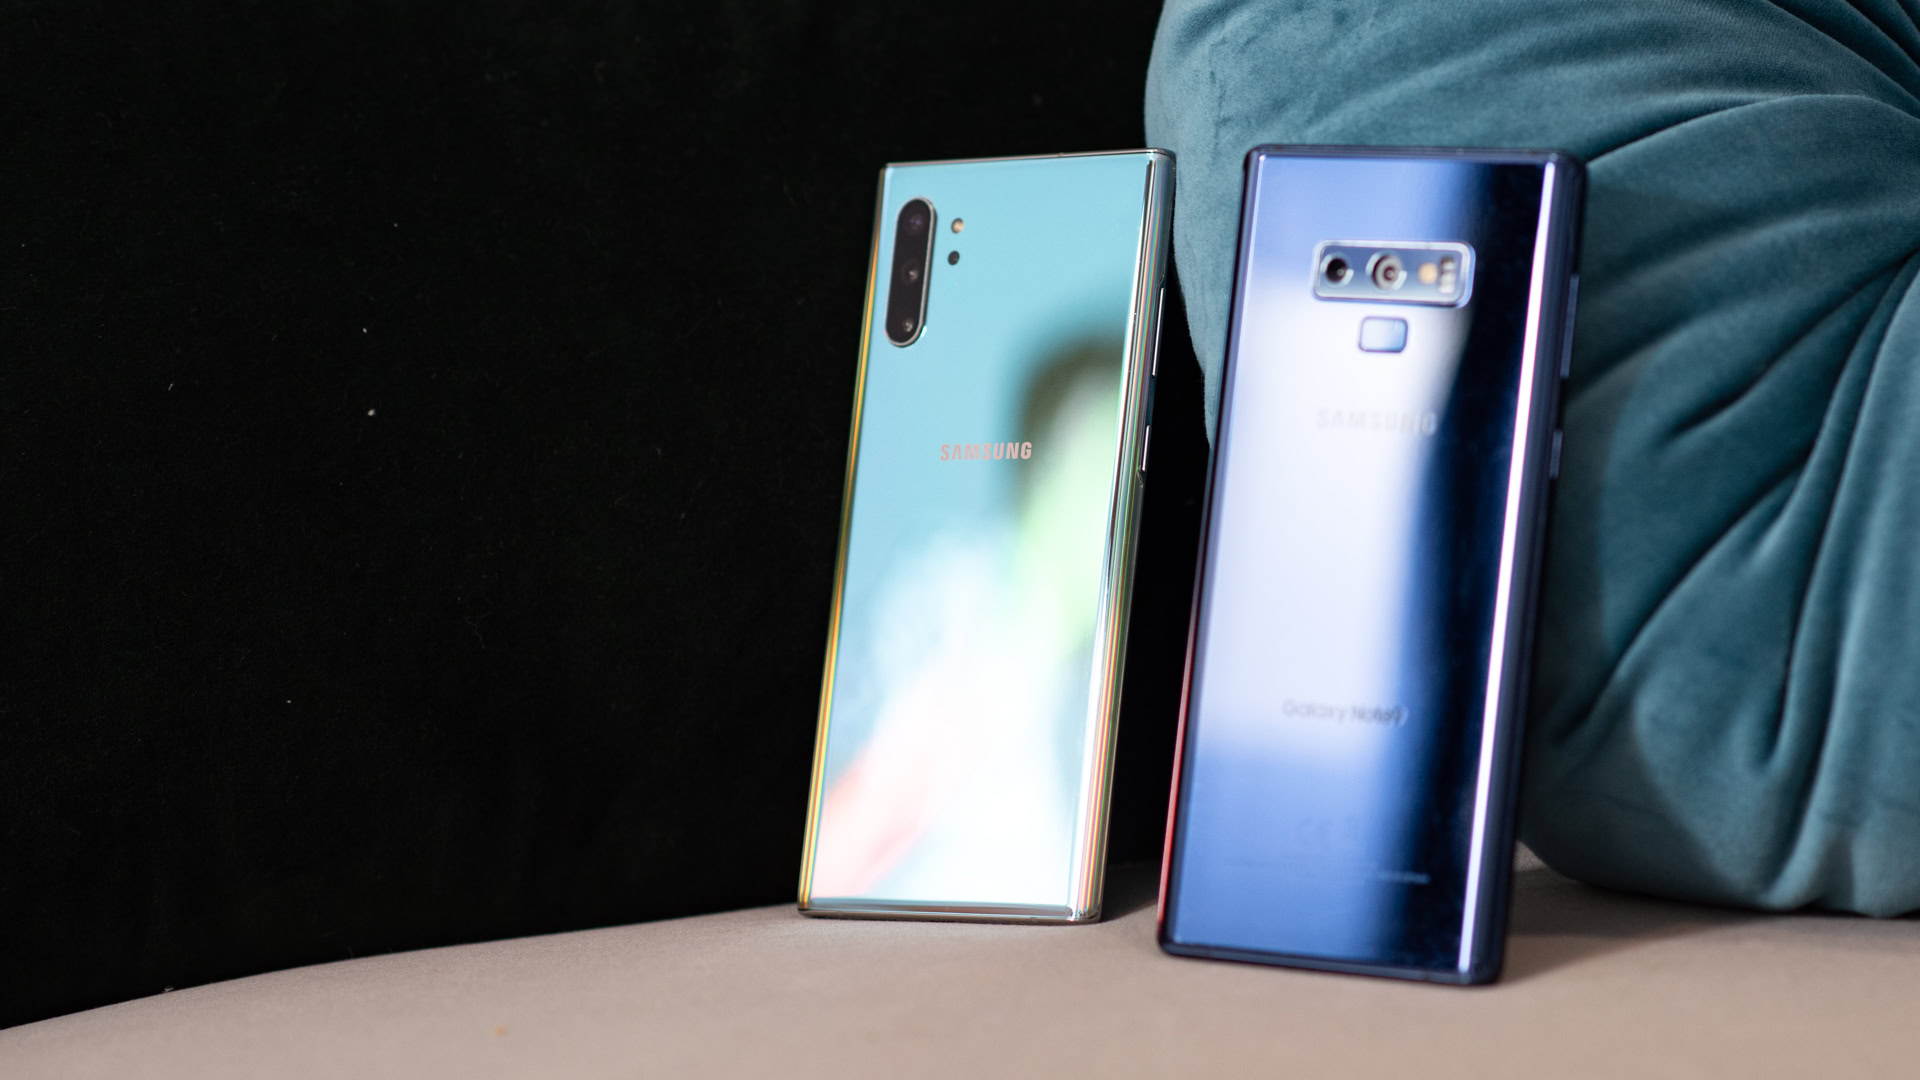 GALAXY NOTE 10 LITE is a NOTE 9 INSIDE and an A10 on the surface